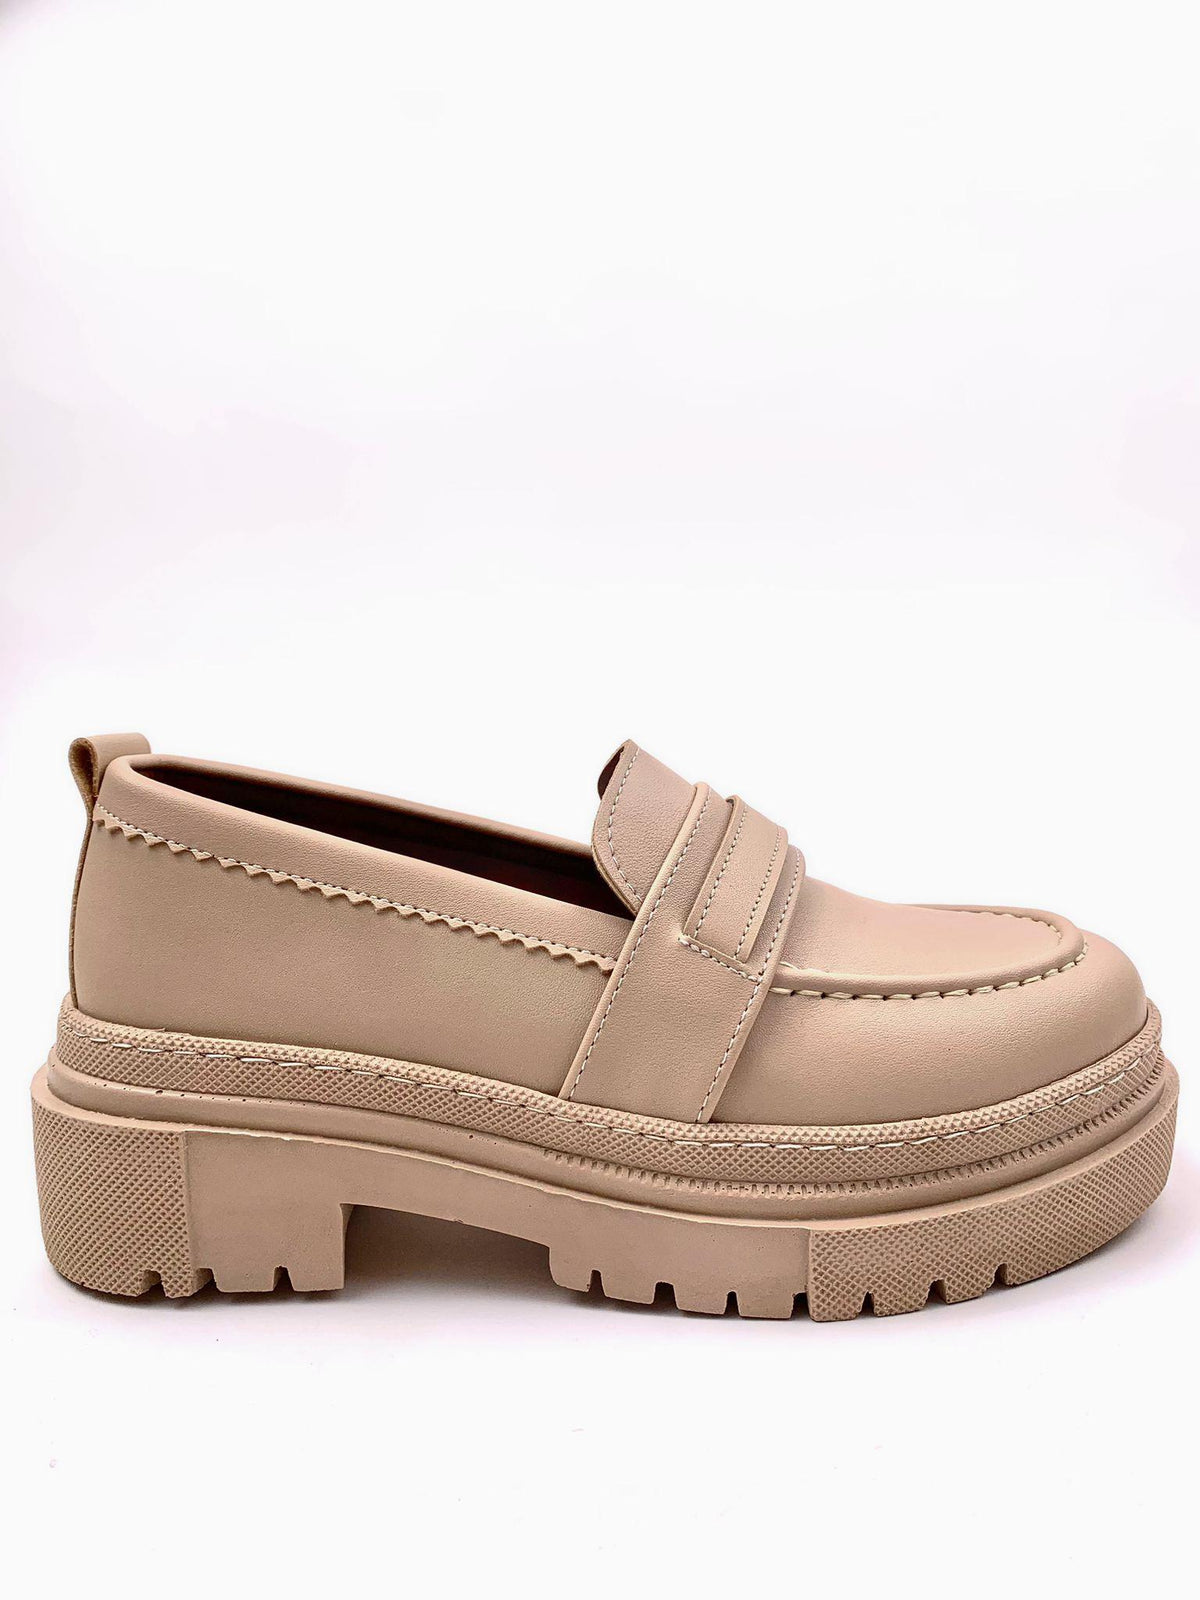 Women's Nut Poxy Skin Poly Orthopedic Comfort Sole Oxford Moccasin High Sole Shoes - STREETMODE™